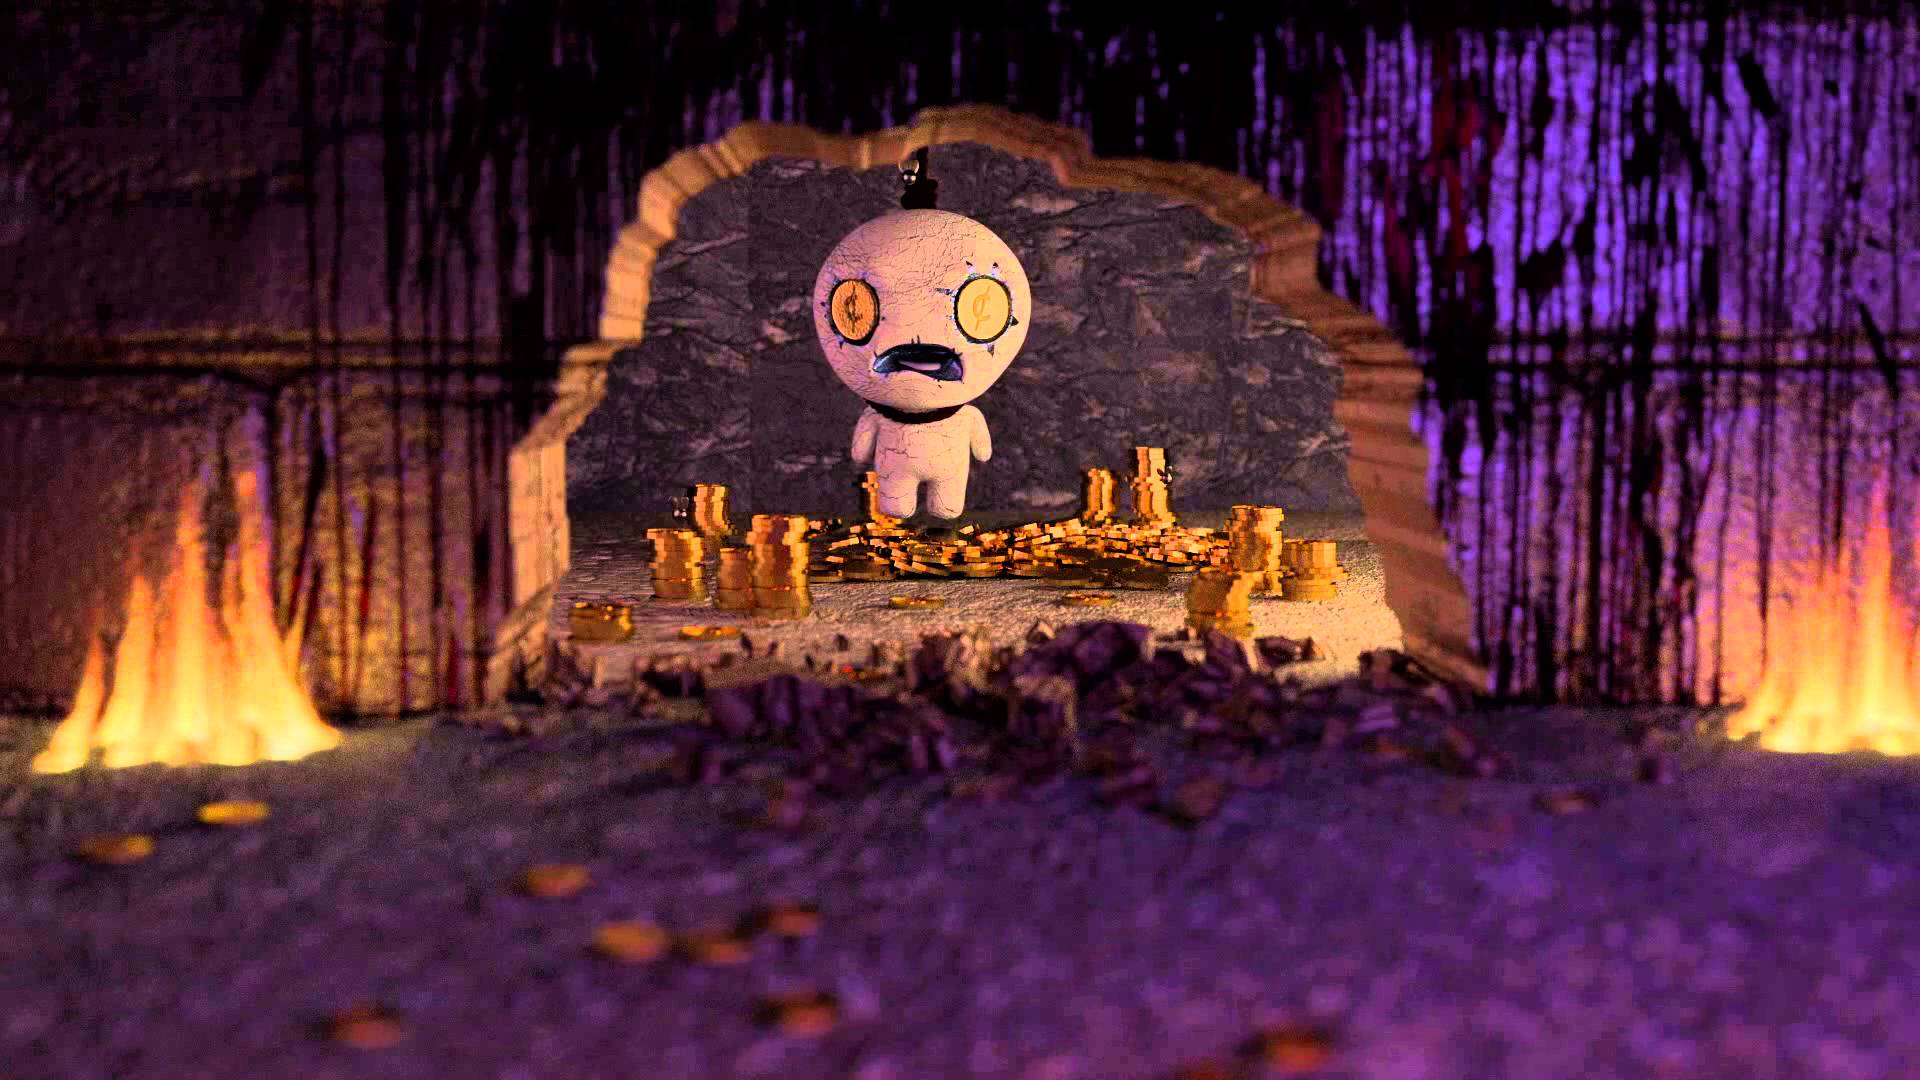 free download the binding of isaac ps4